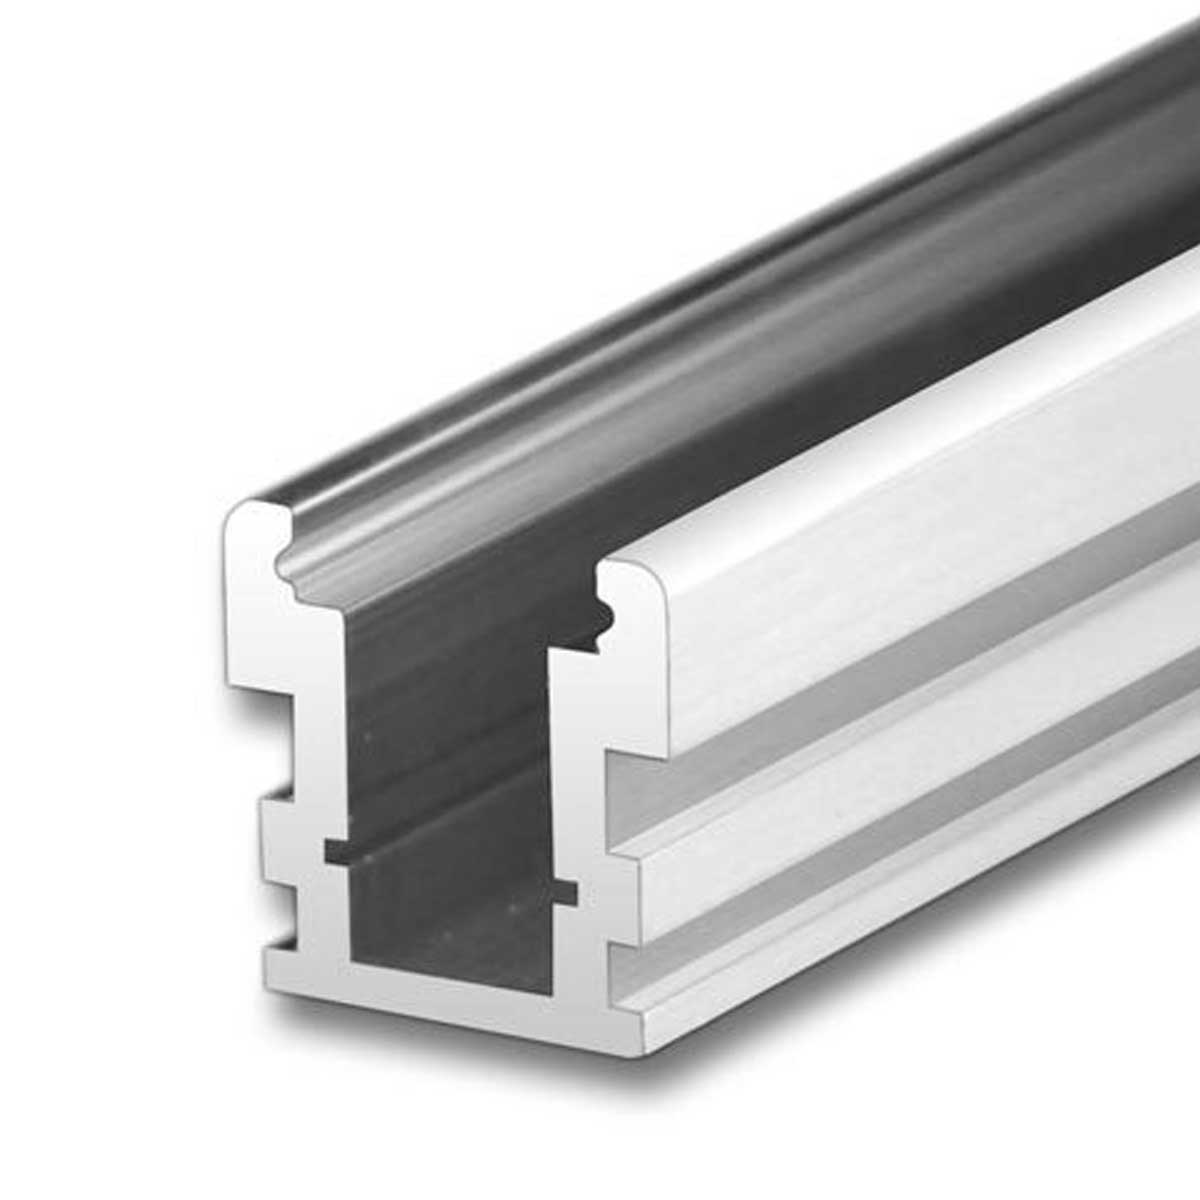 1000 Aluminium Slotted Channel Manufacturers, Suppliers in Dewas